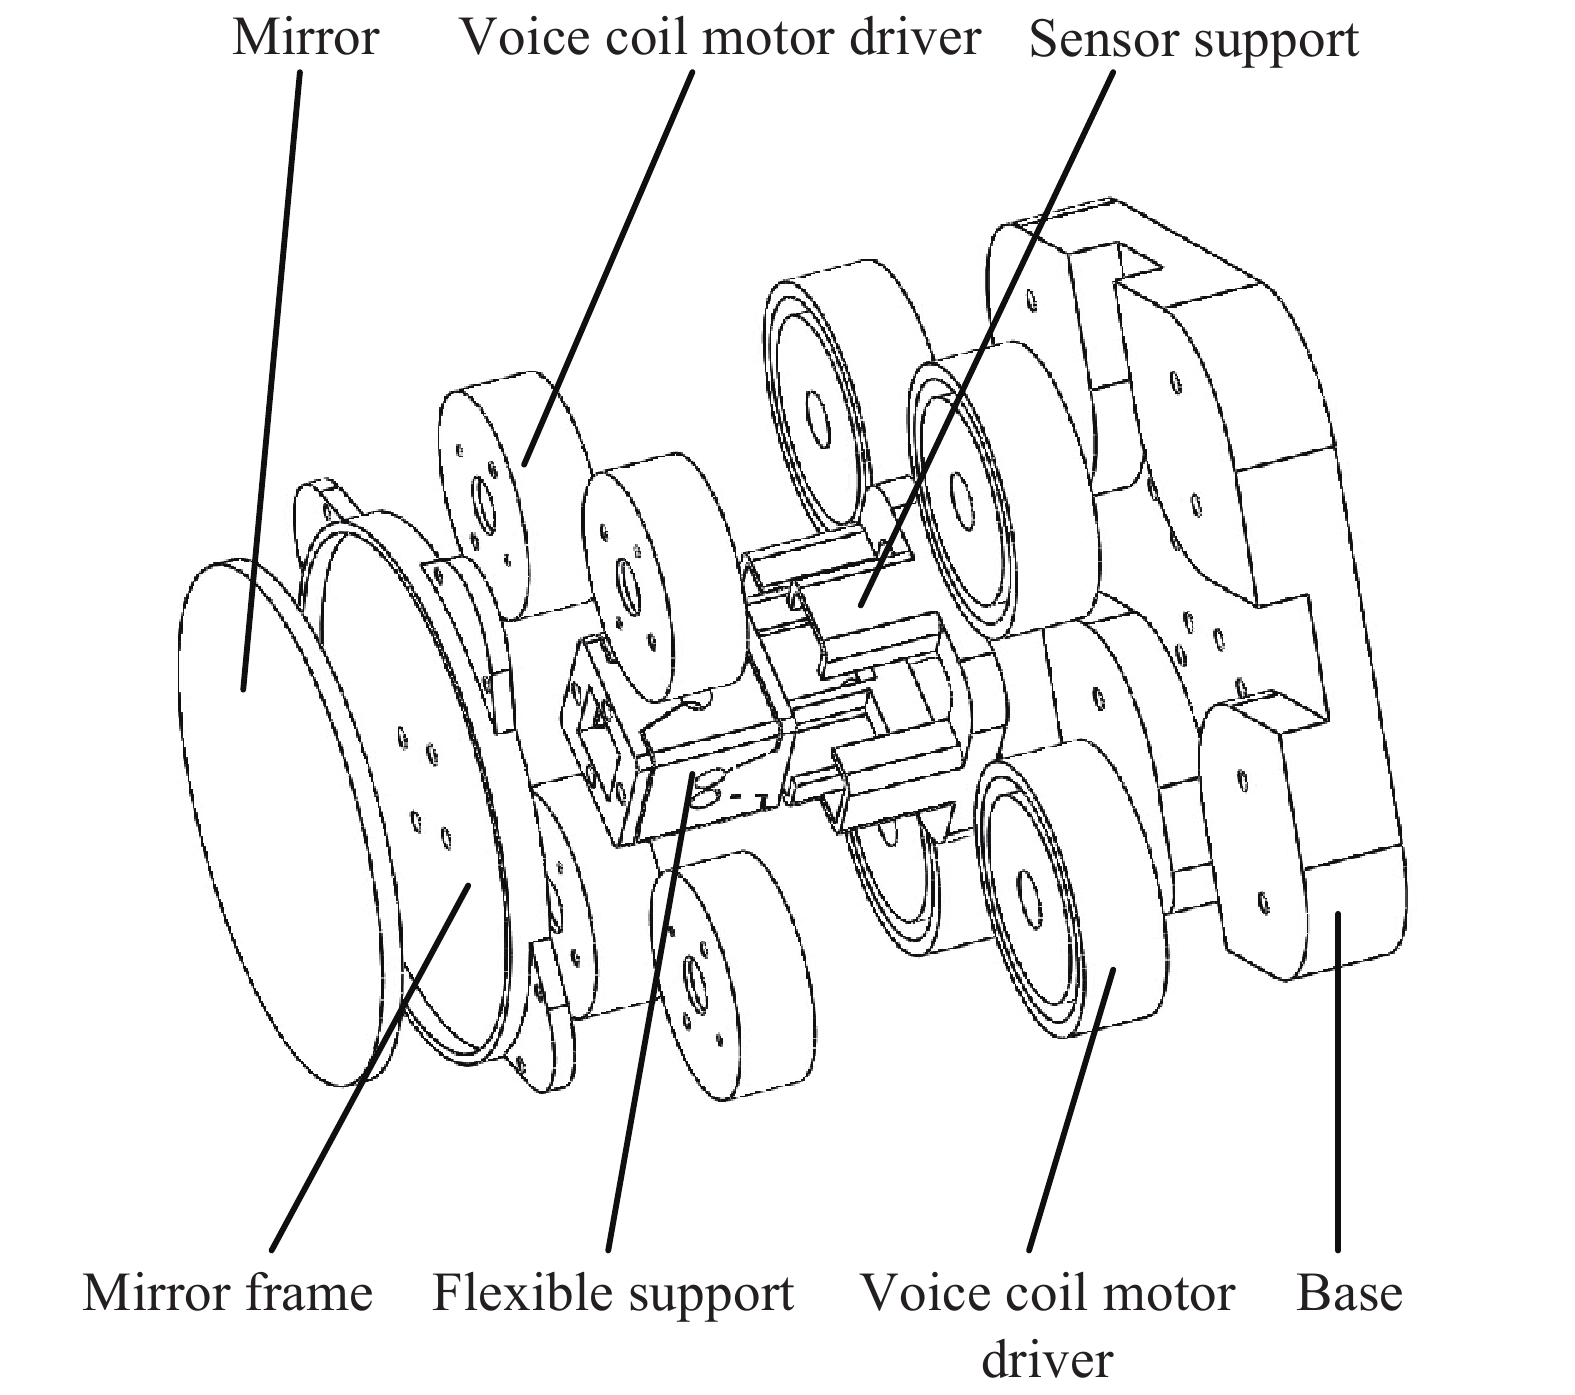 Structure component of fast steering mirror